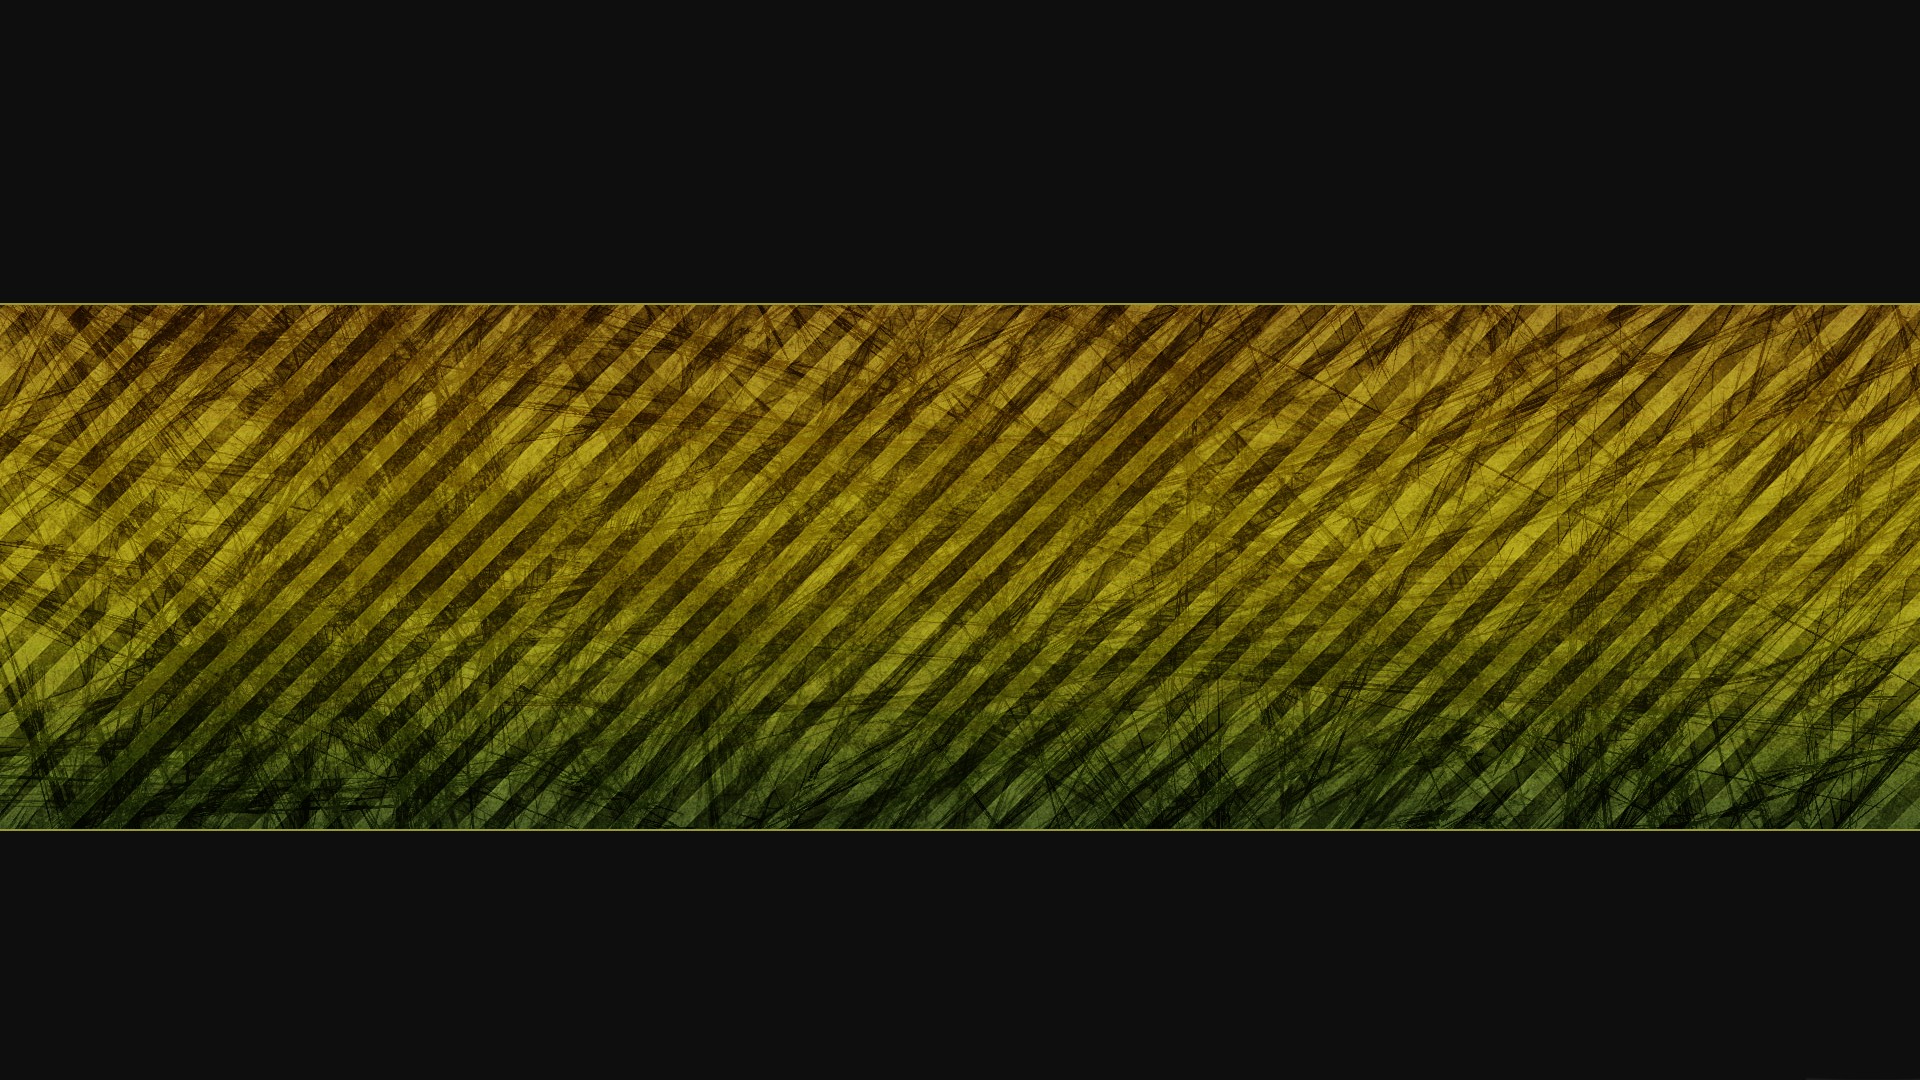 General 1920x1080 green yellow stripes abstract